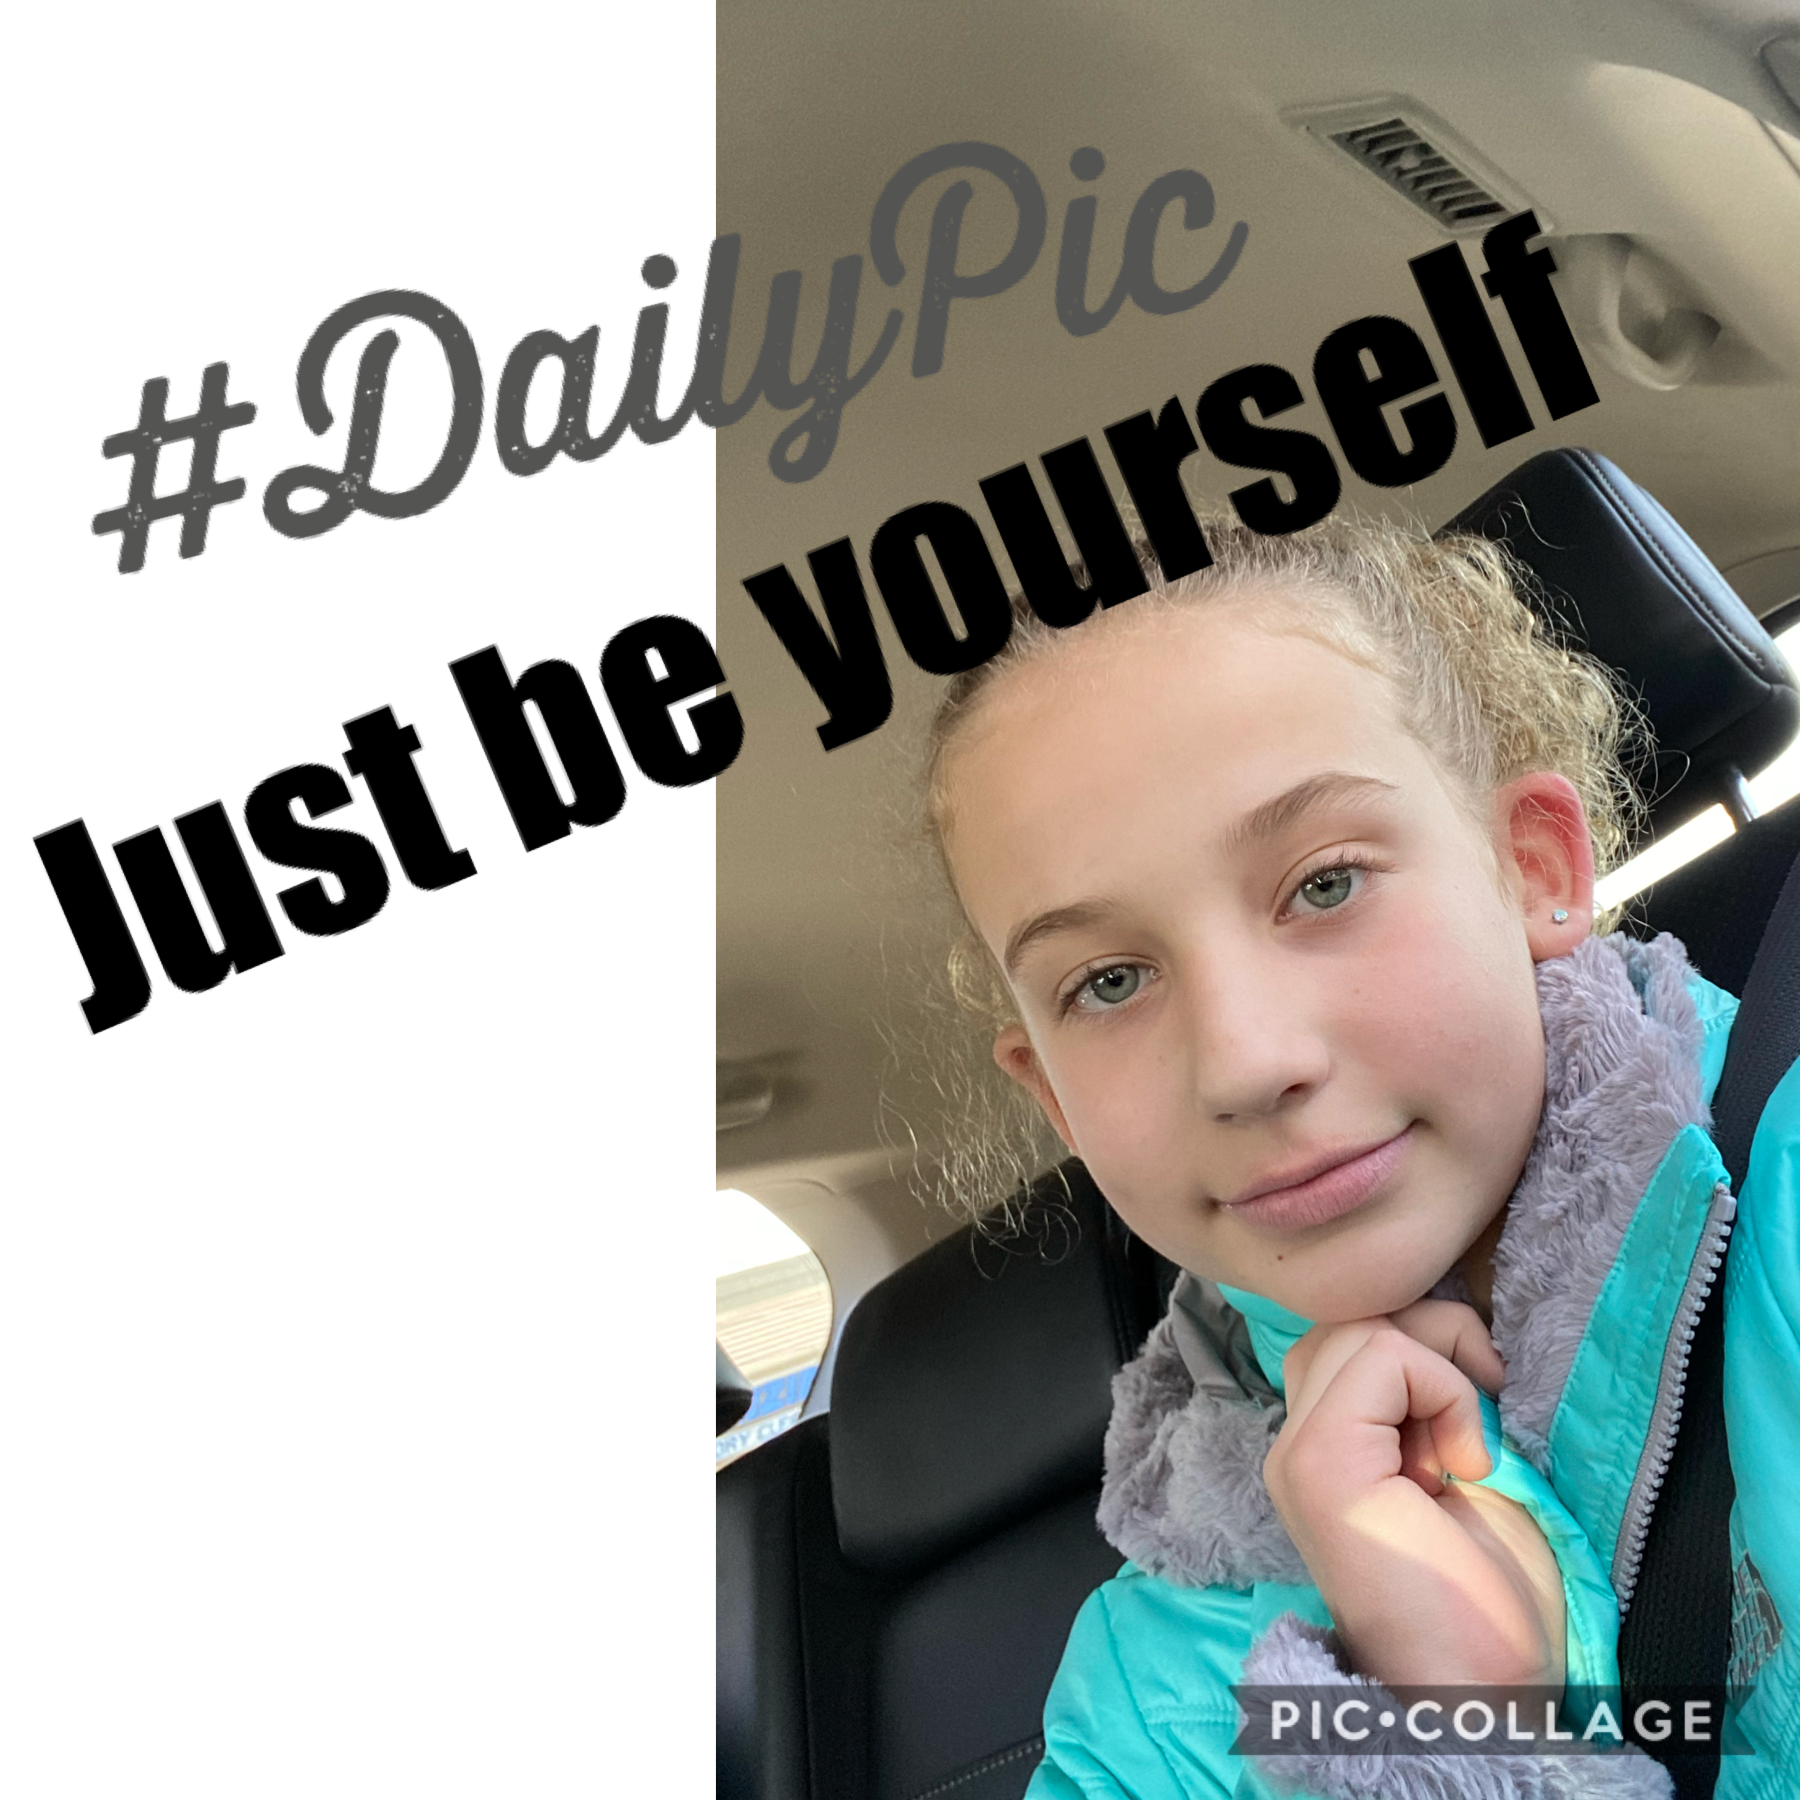 Just be yourself all day!!